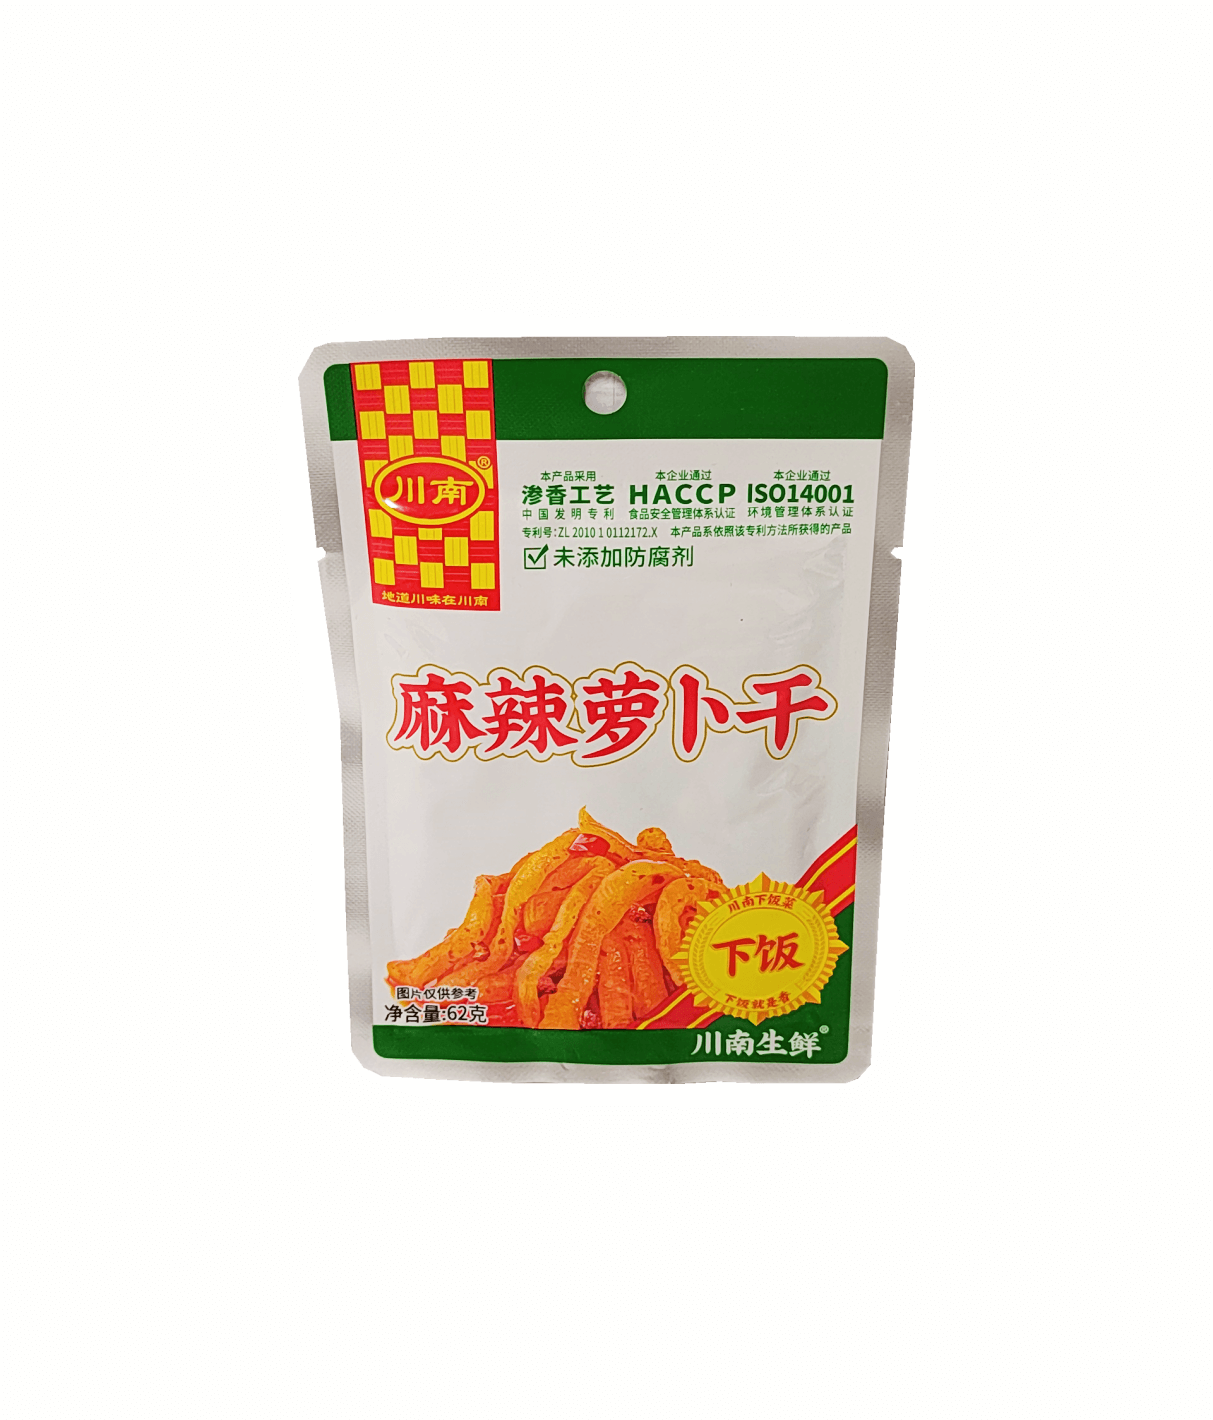 Dried radish with sweet and sour chili flavor 62g Chuannan China